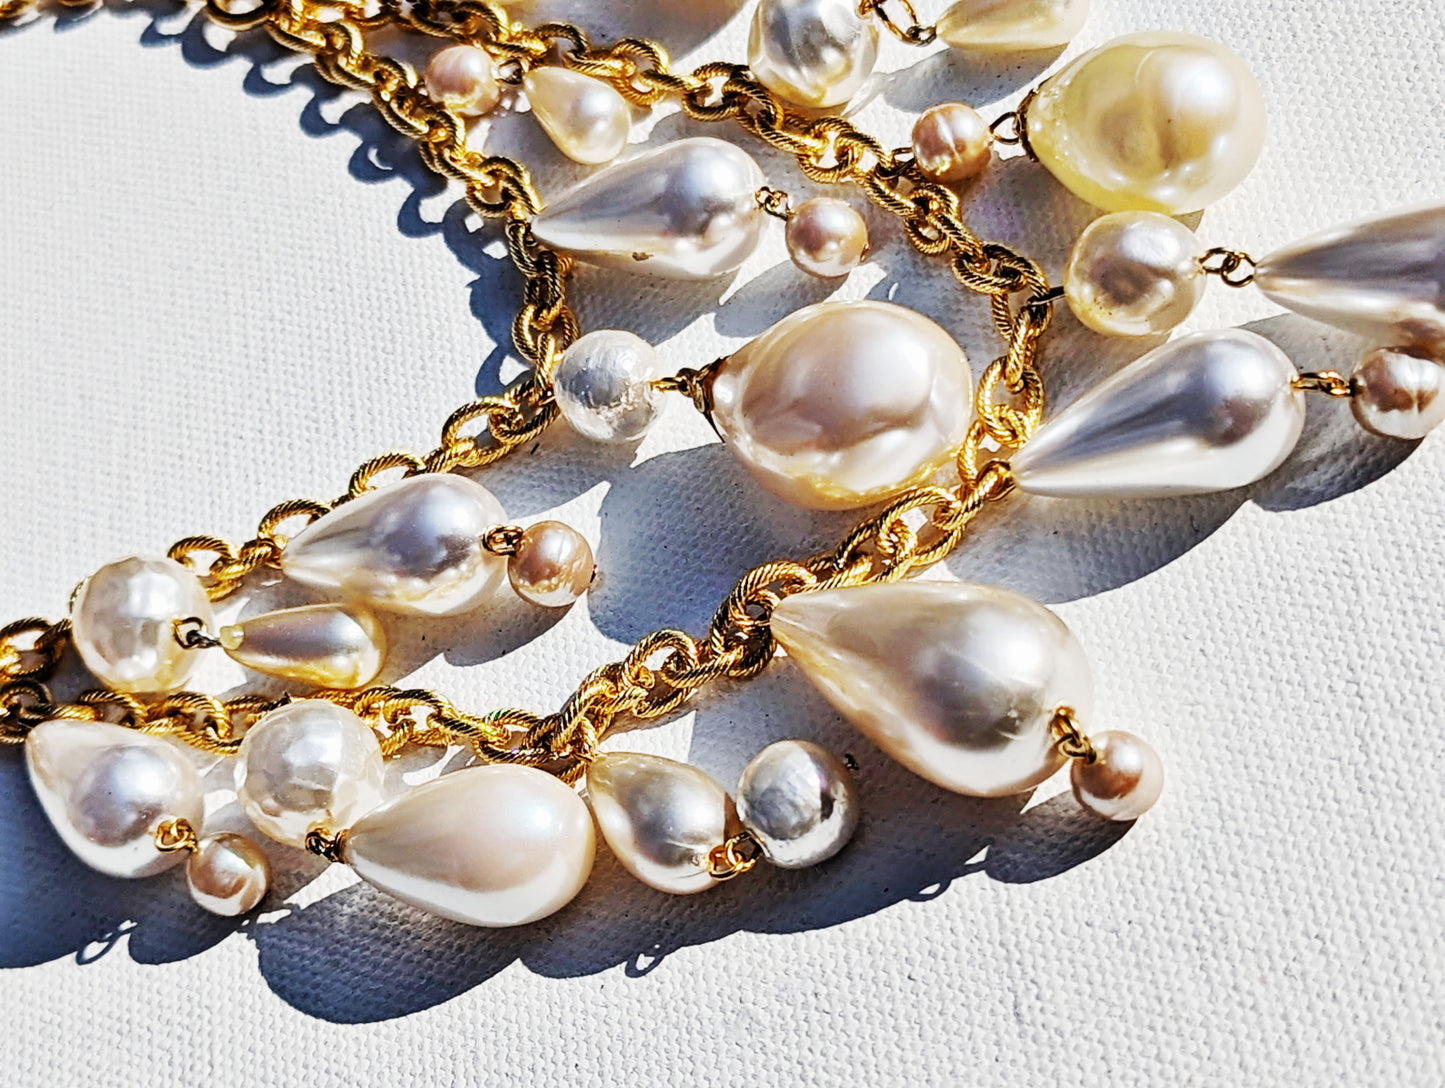 Vintage Japanese Pearls and Drops 2 Strands Gold Textured Chain 20 inches adjustable US Made Handmade Sugar Gay Isber